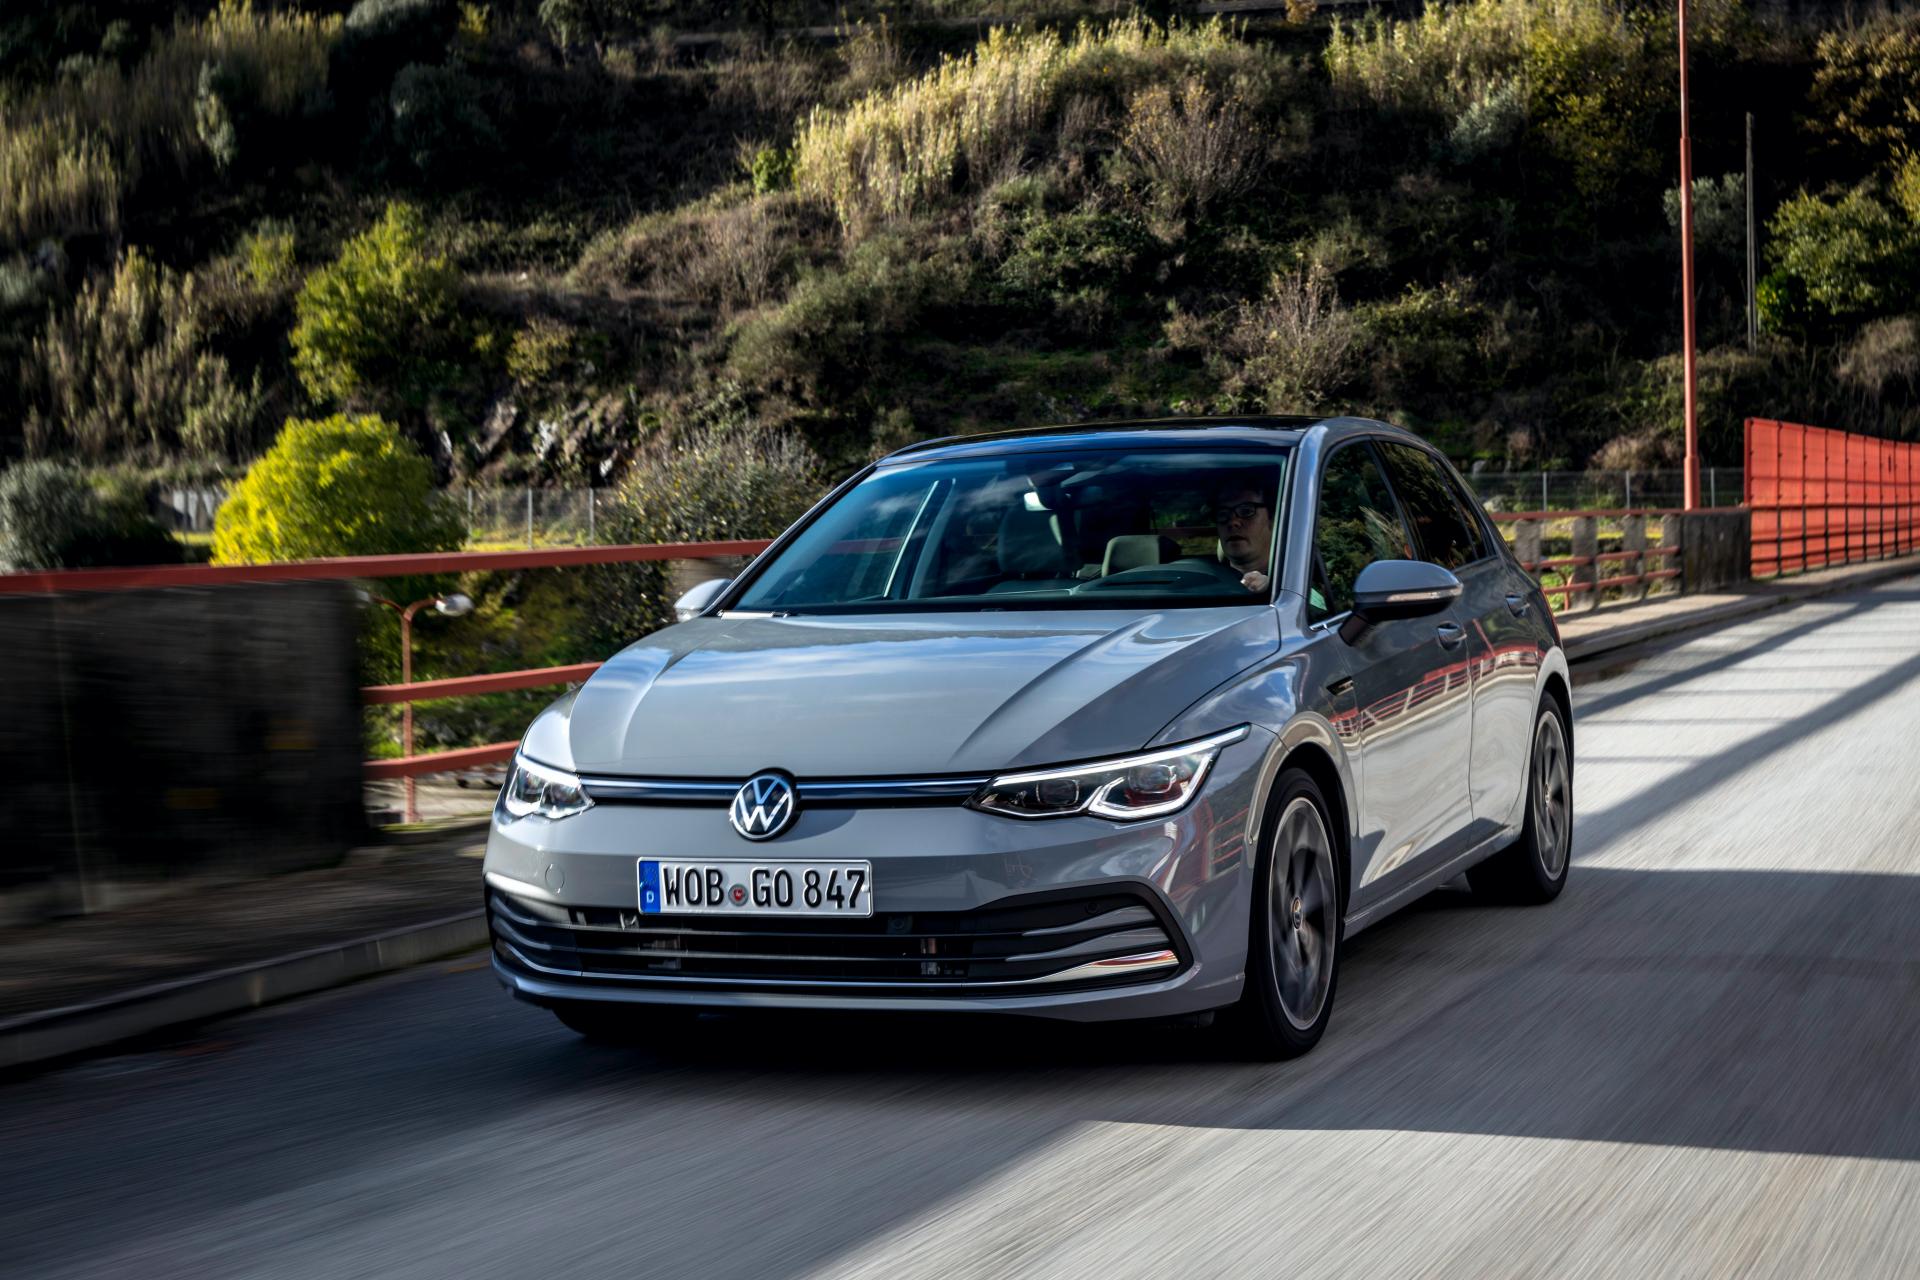 2020 VW Golf Photographed In Great Detail At Media Launch In Portugal ...